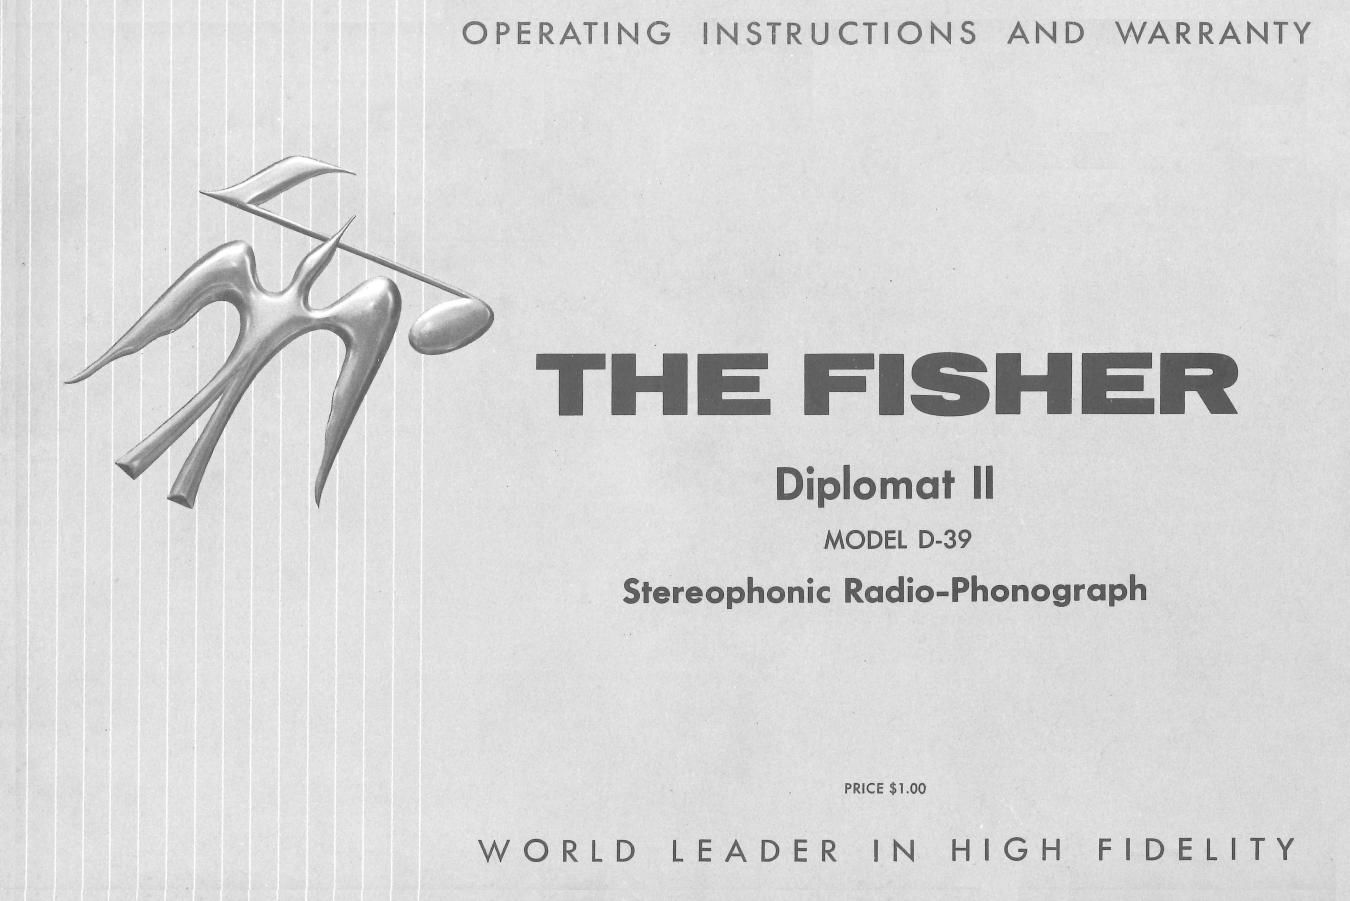 Fisher D 39 Owners Manual